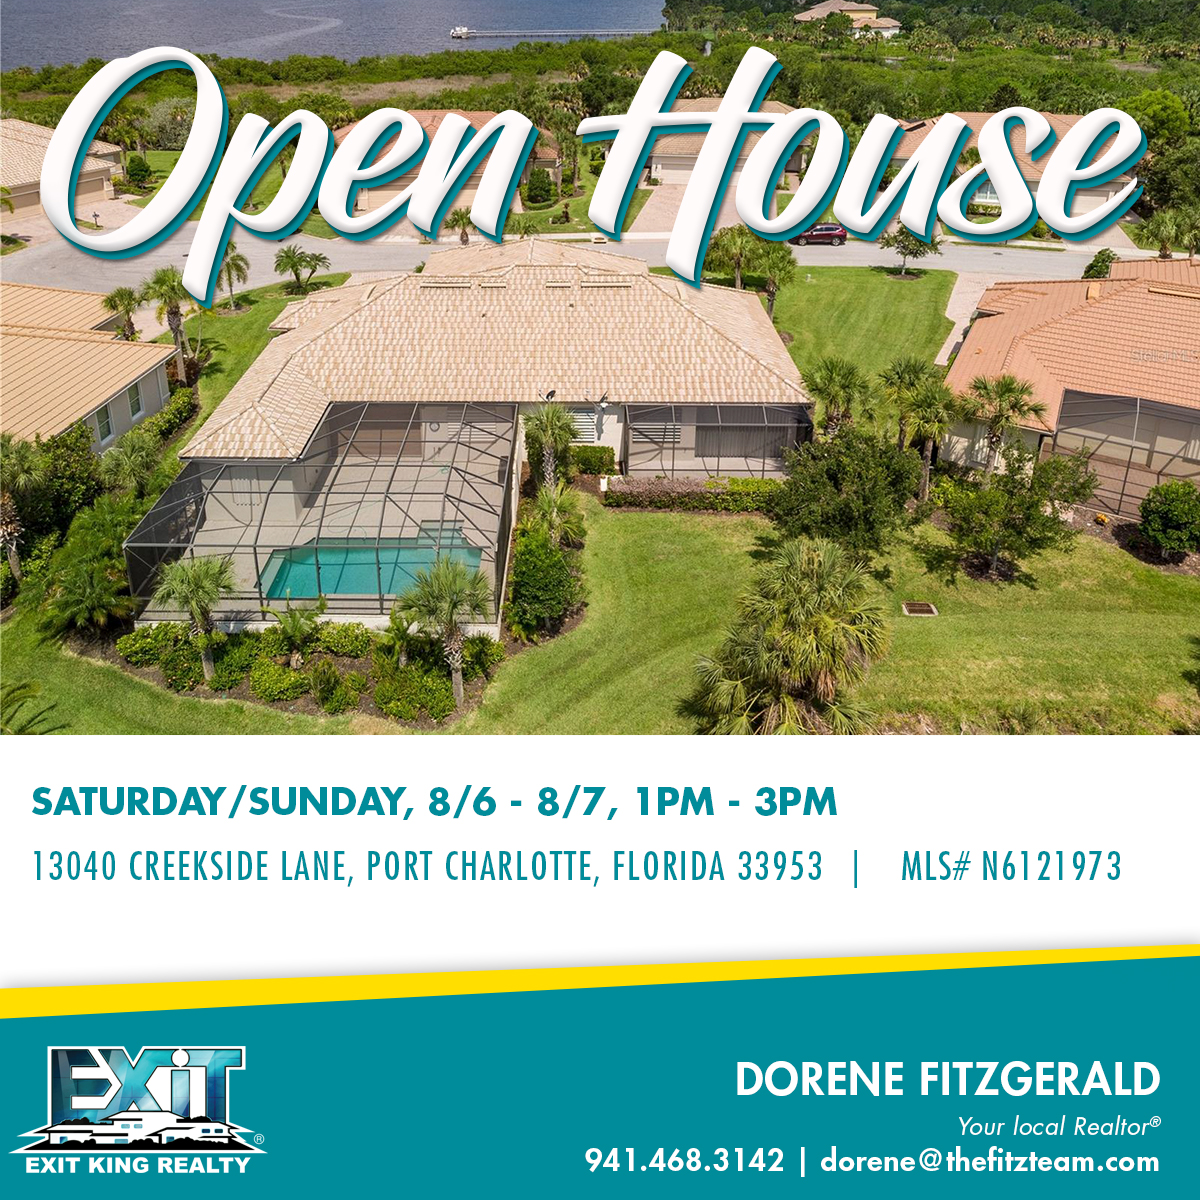 Open House
13040 Creekside Lane, Port Charlotte, Florida 33953
August 6, 1PM-4PM

MLS Number: N6121973

#exitking #realty #homeforsale #florida #portcharlotterealestate #portcharlotterealtor